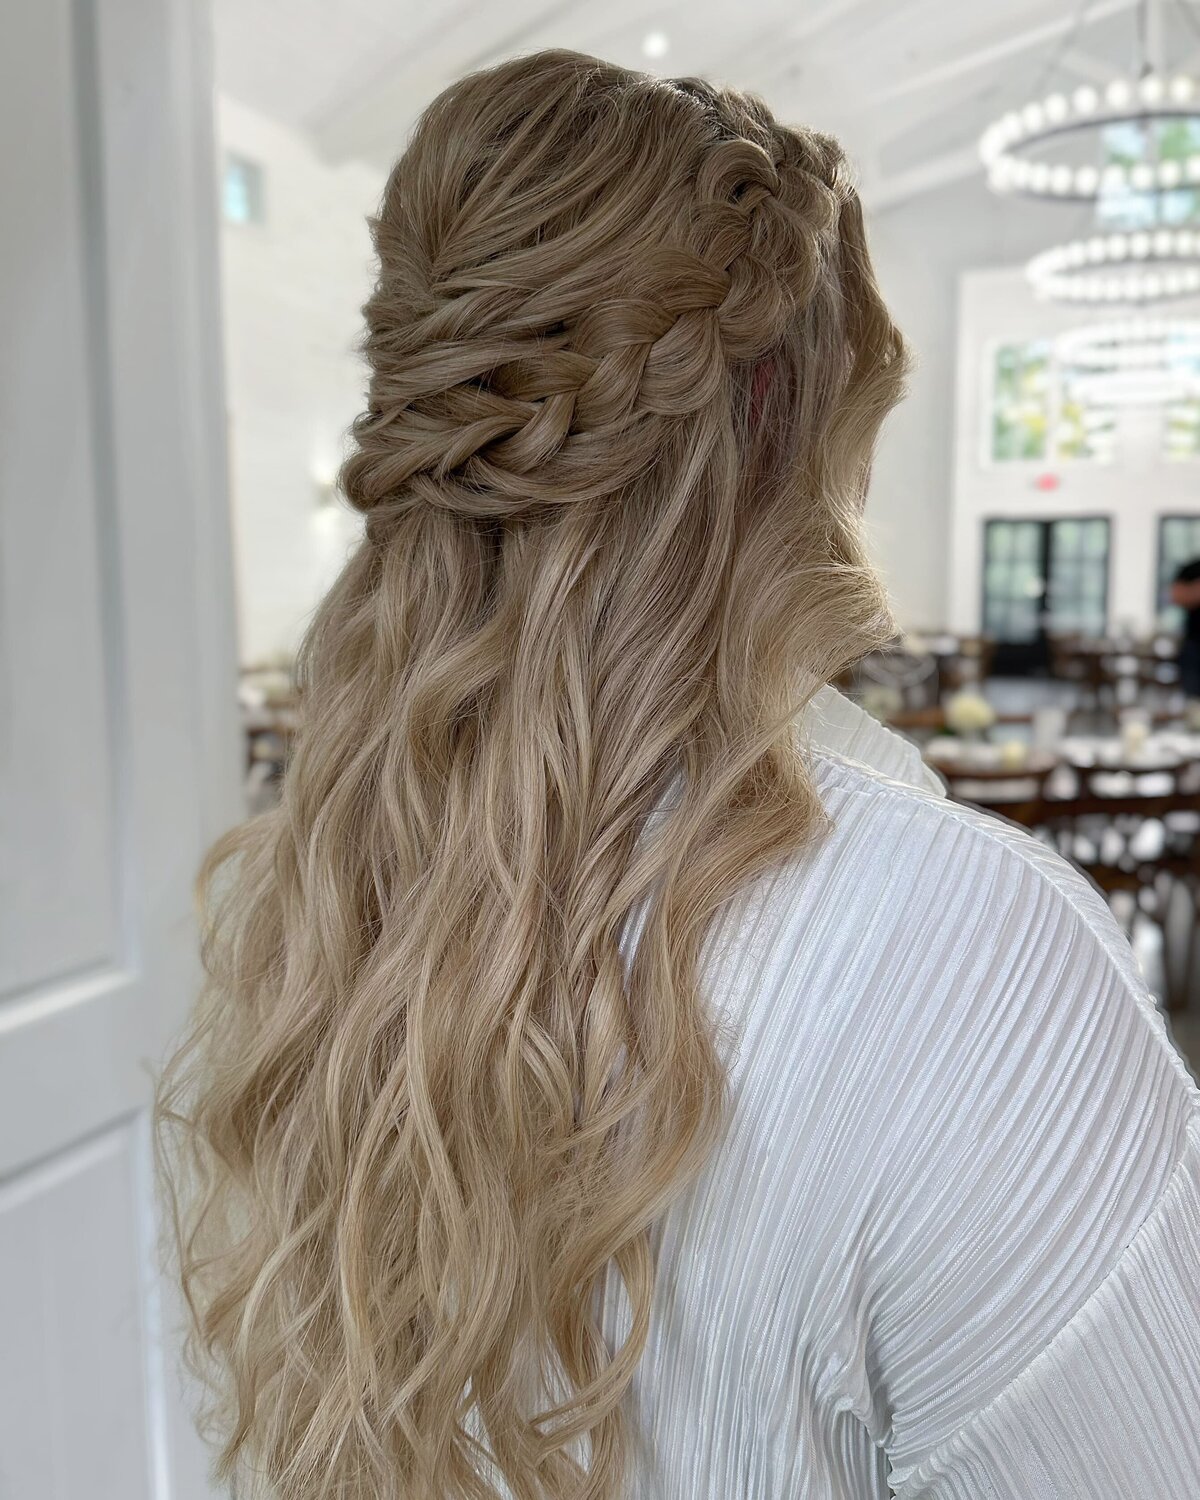 Lilly Bridal Artistry - Wedding Hair and Makeup Artists - Behind the Scenes 12